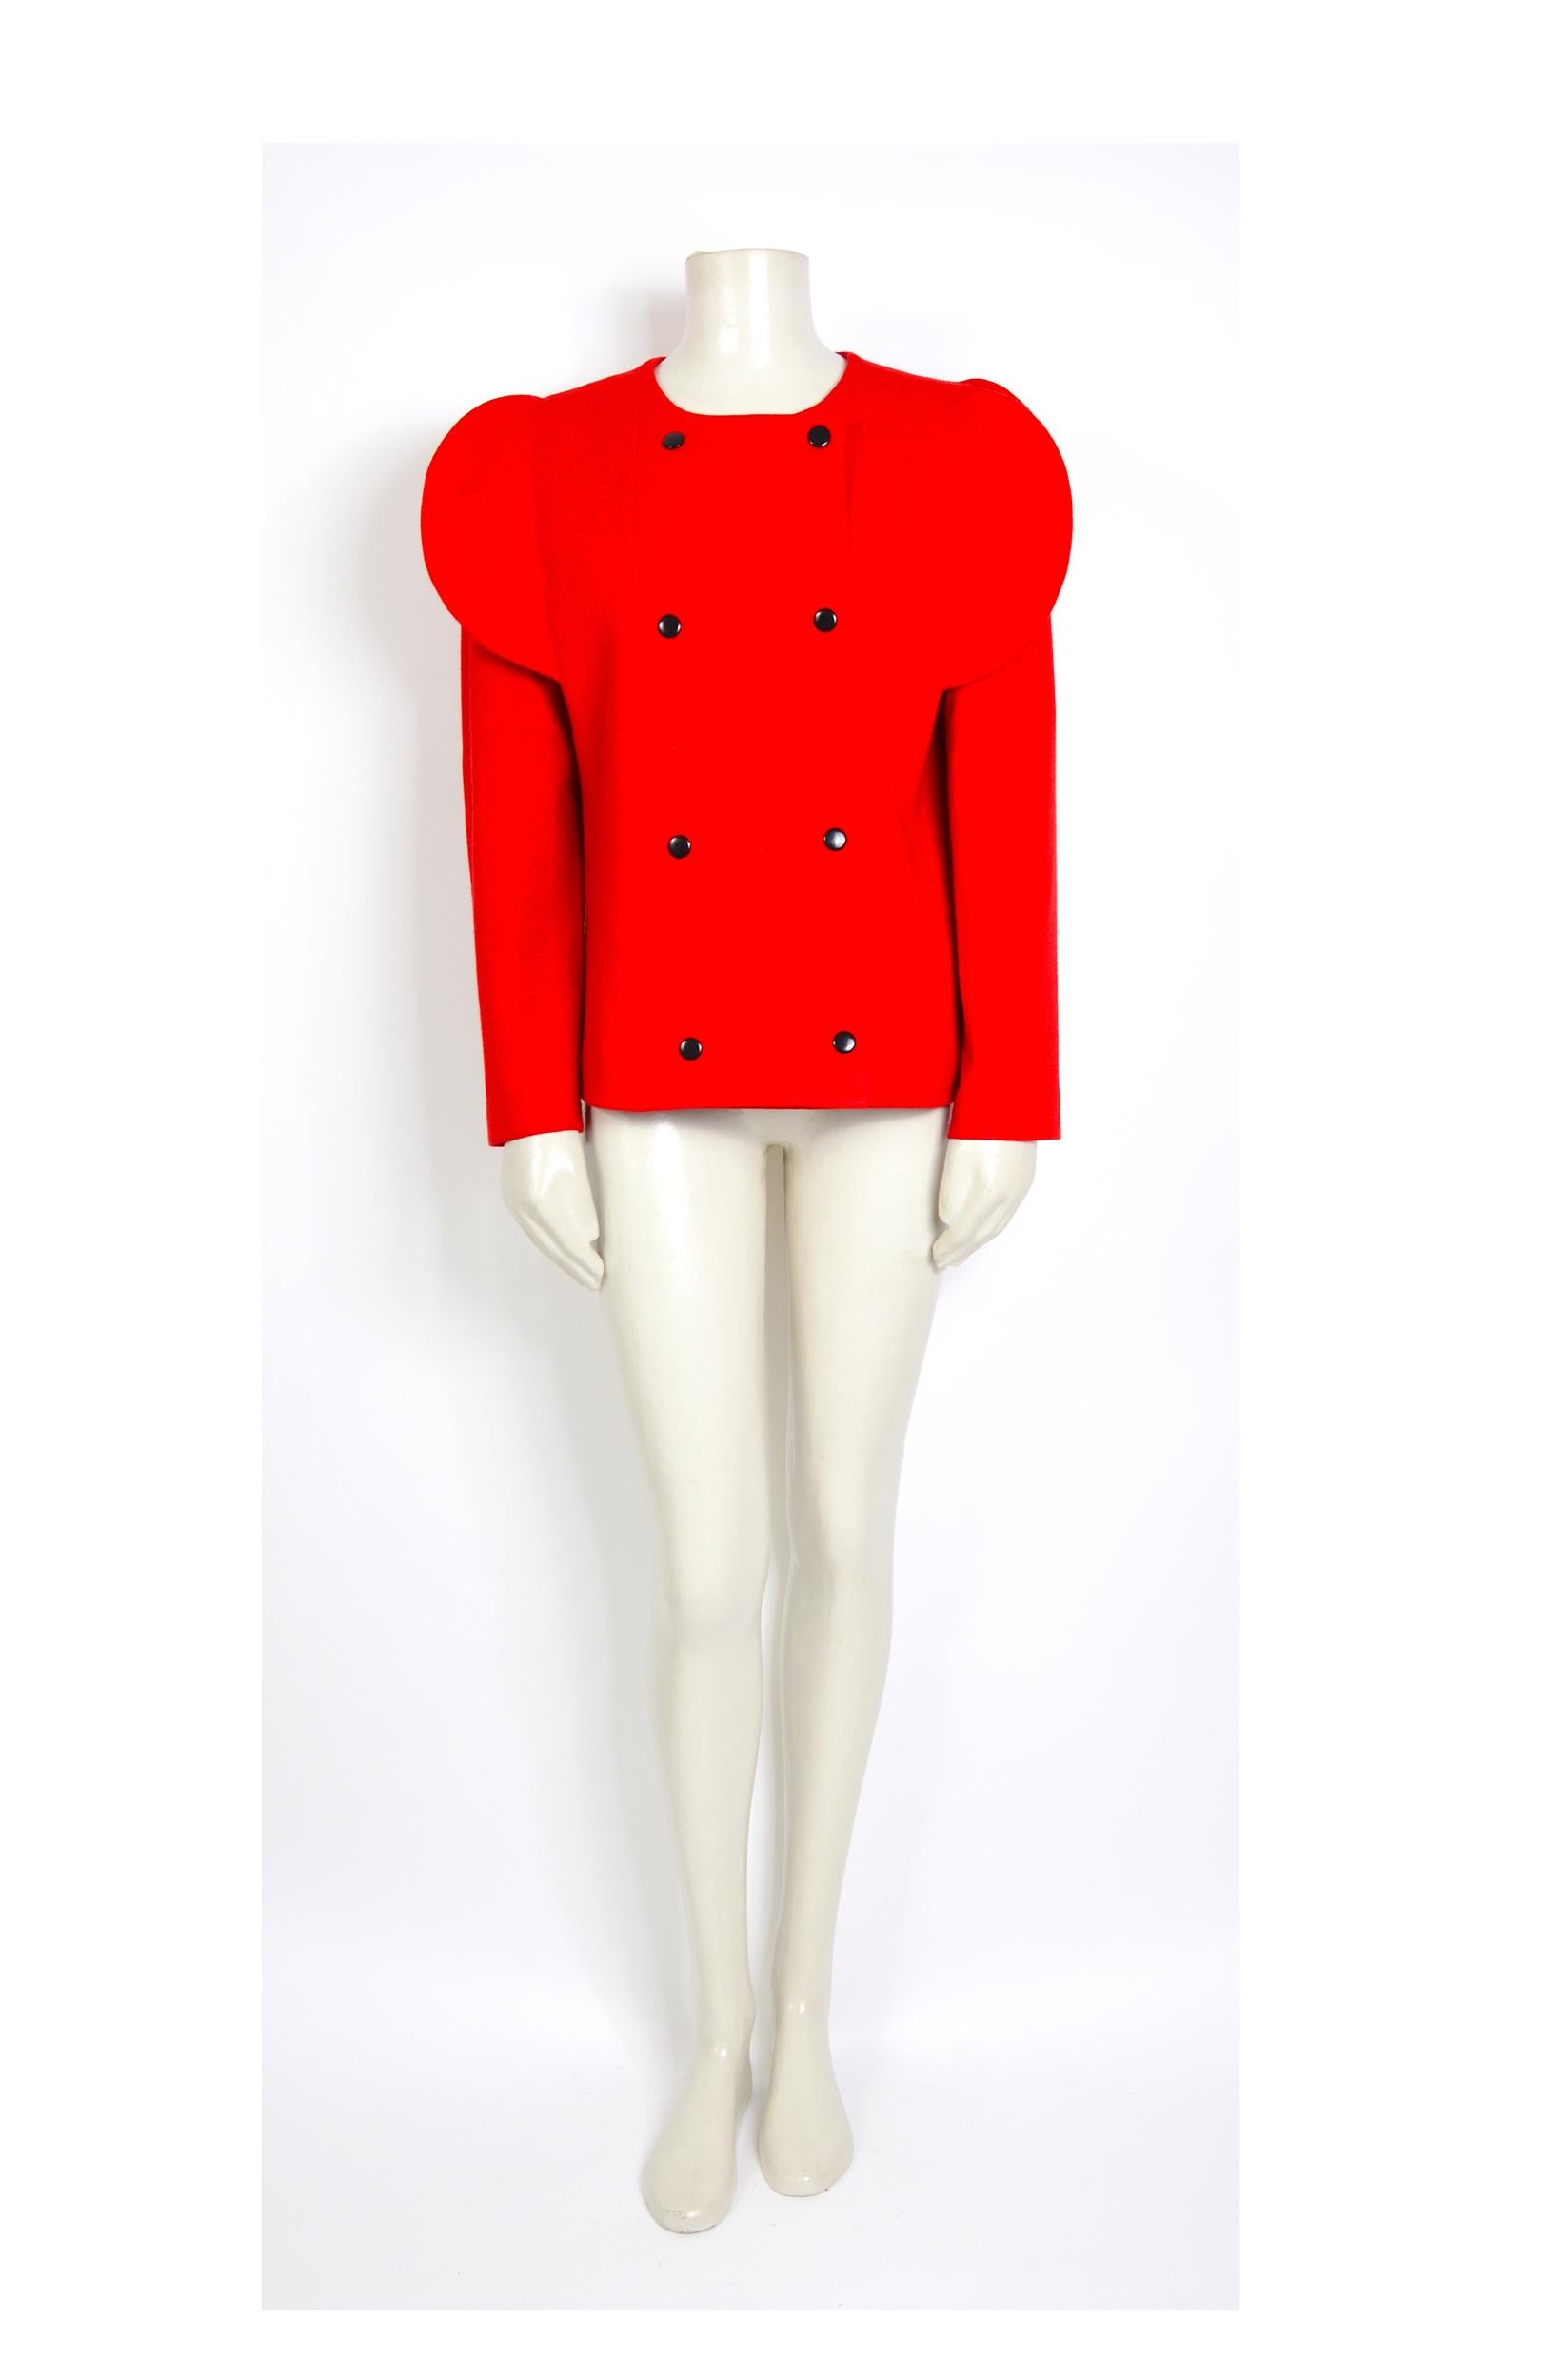 Pierre Cardin scalloped-edge red wool mix jacket from the designer’s spring/summer 1993 couture show in Paris. 
French size 40
Measurements that are taken flat:
Sh to Sh 18inch/46cm - Ua to Ua 21inch/53cm(x2) - Waist 18,5/47cm(x2) - SL 23inch/59cm -